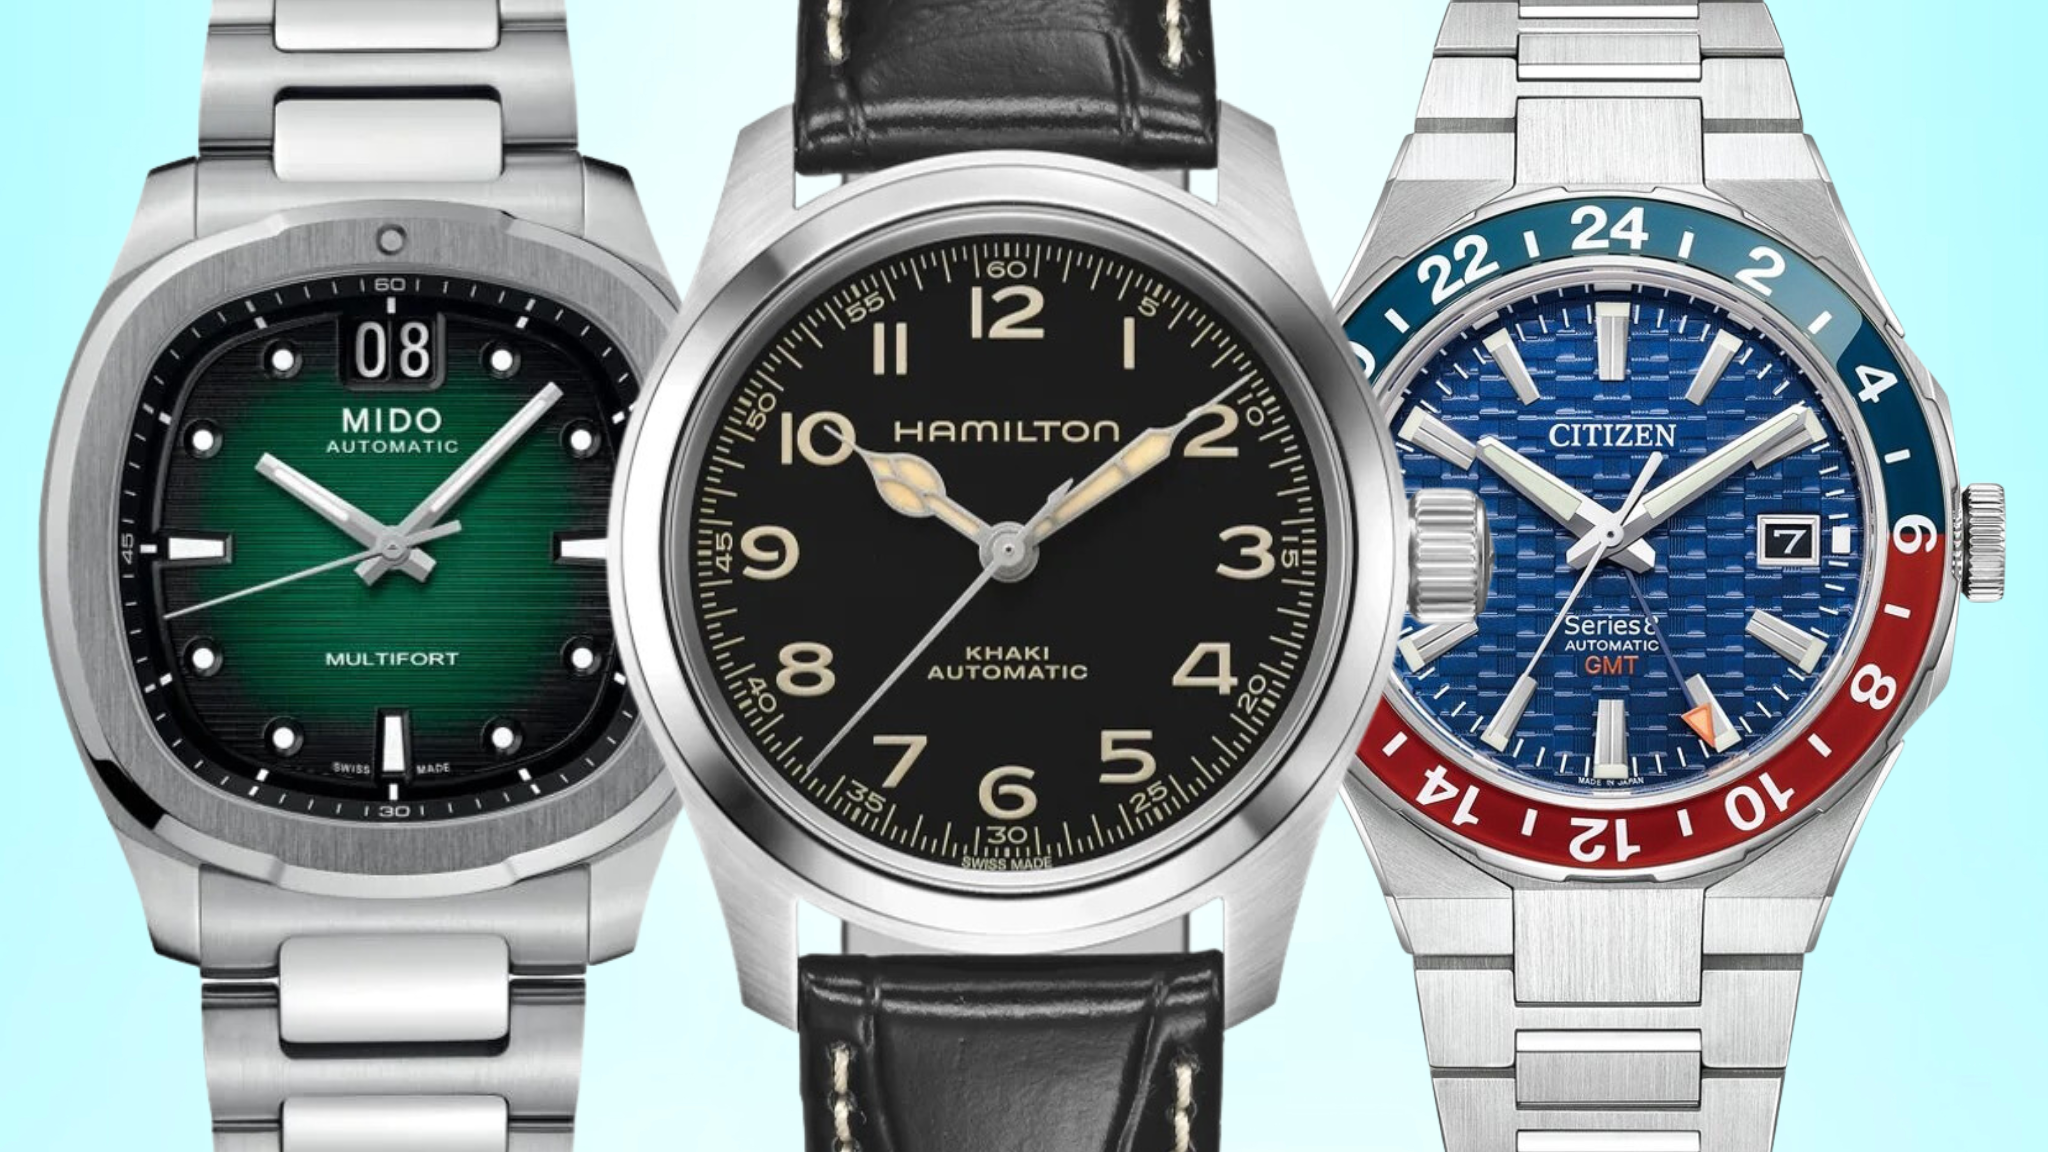 The Orient Bambino 38 Collection offers some of the best value-for-money